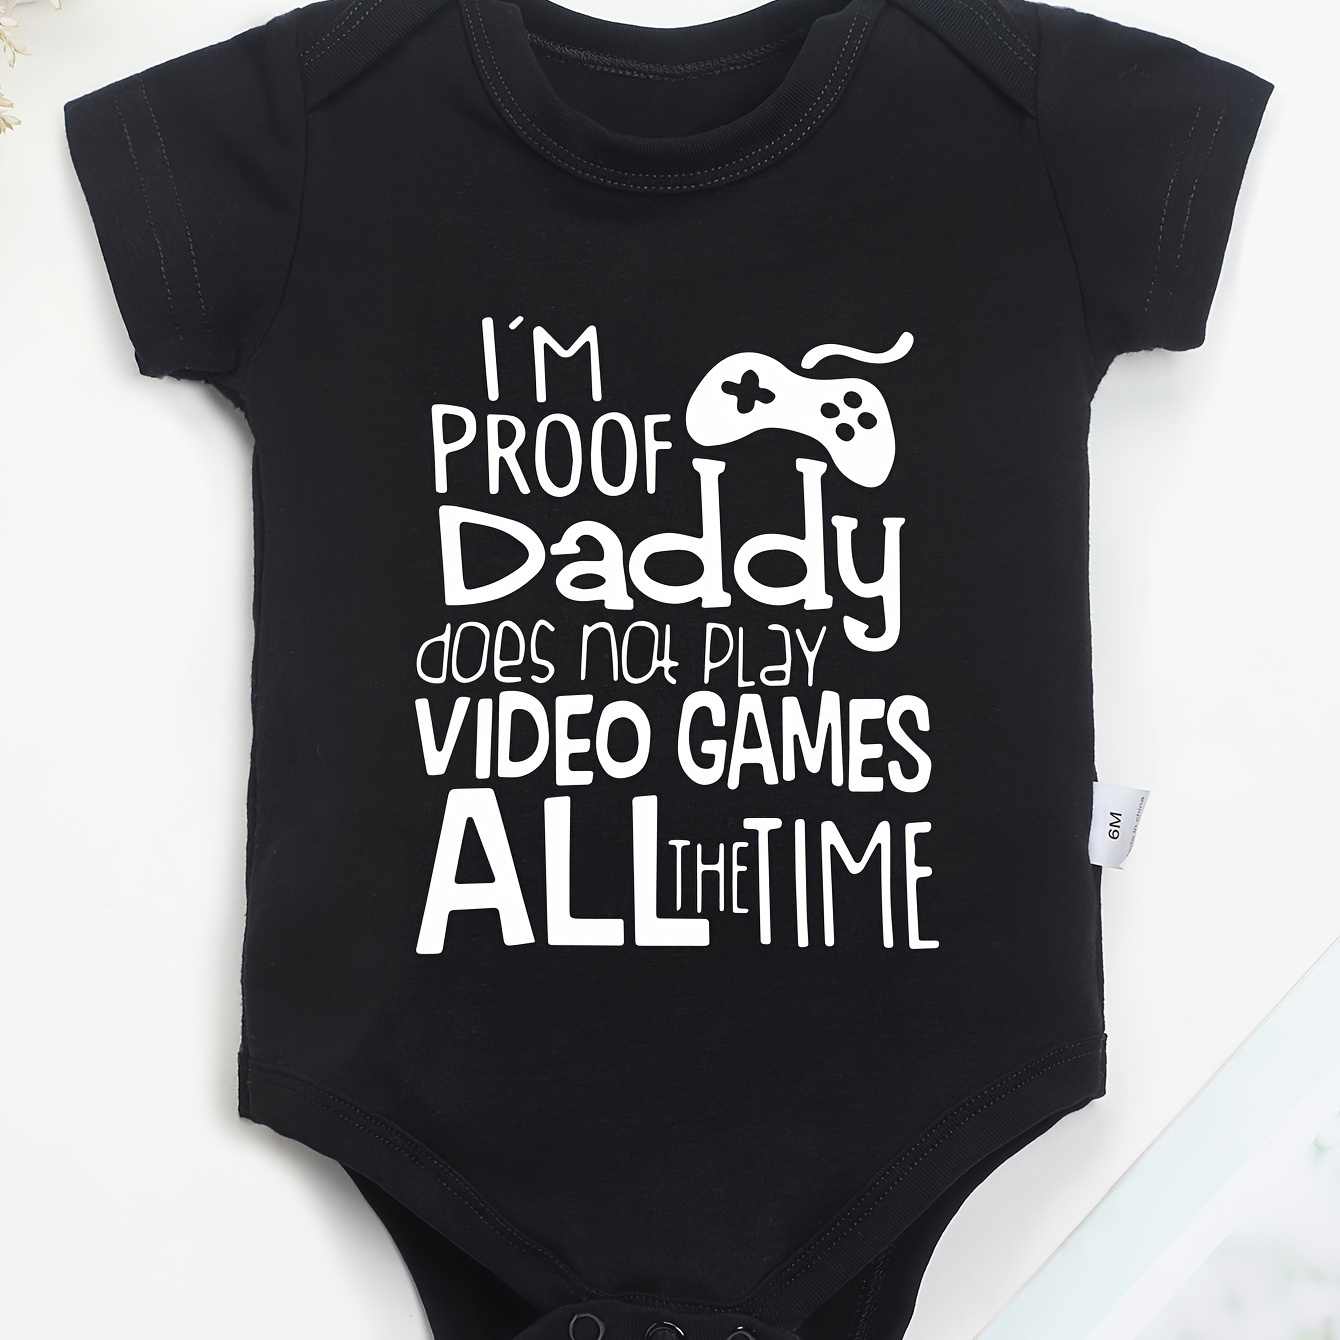 

100% Pure Cotton Baby Jumpsuit, I'm Proof Daddy Does Not Play Video Game All The Time Letter Prints, Soft Casual Round Neck Baby Jumpsuit